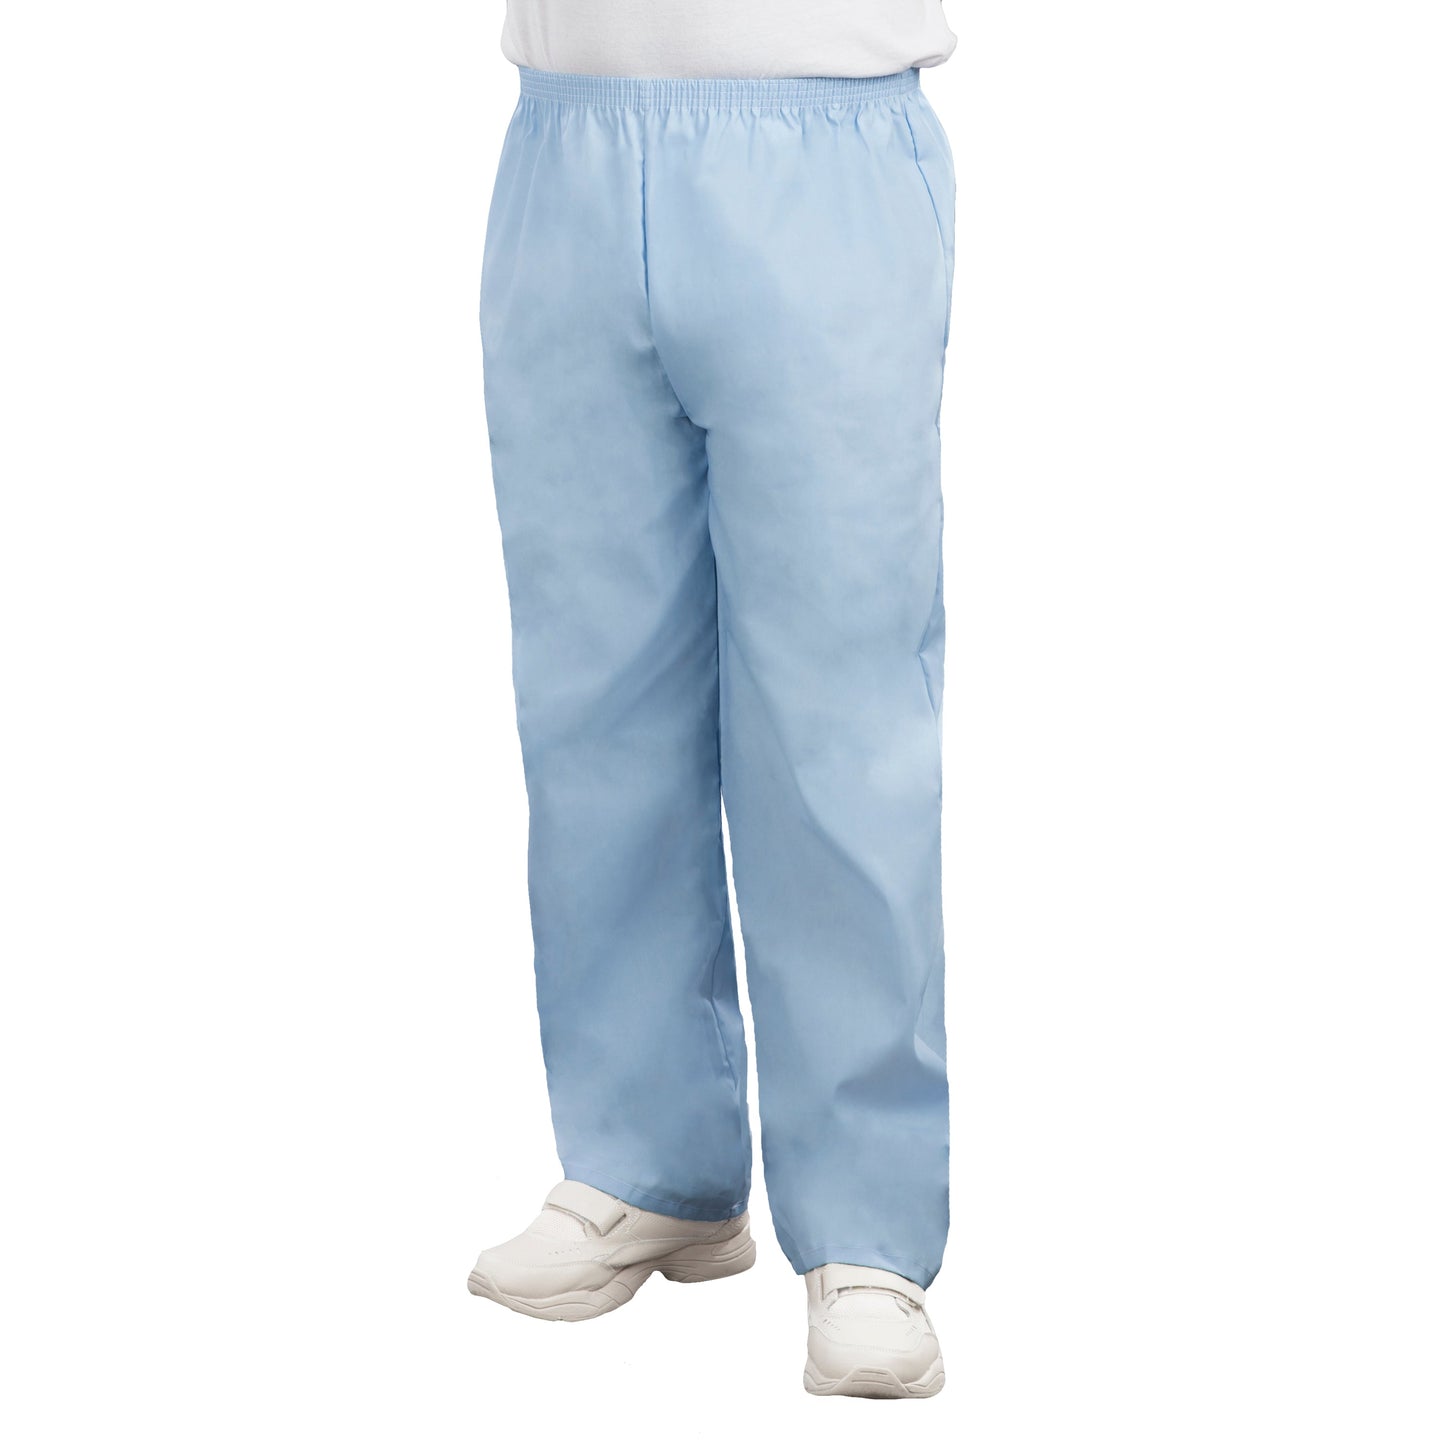 American Dawn | Light Blue X-Large Patient Bottoms | Pajama Pant With No Pockets And Fly Opening